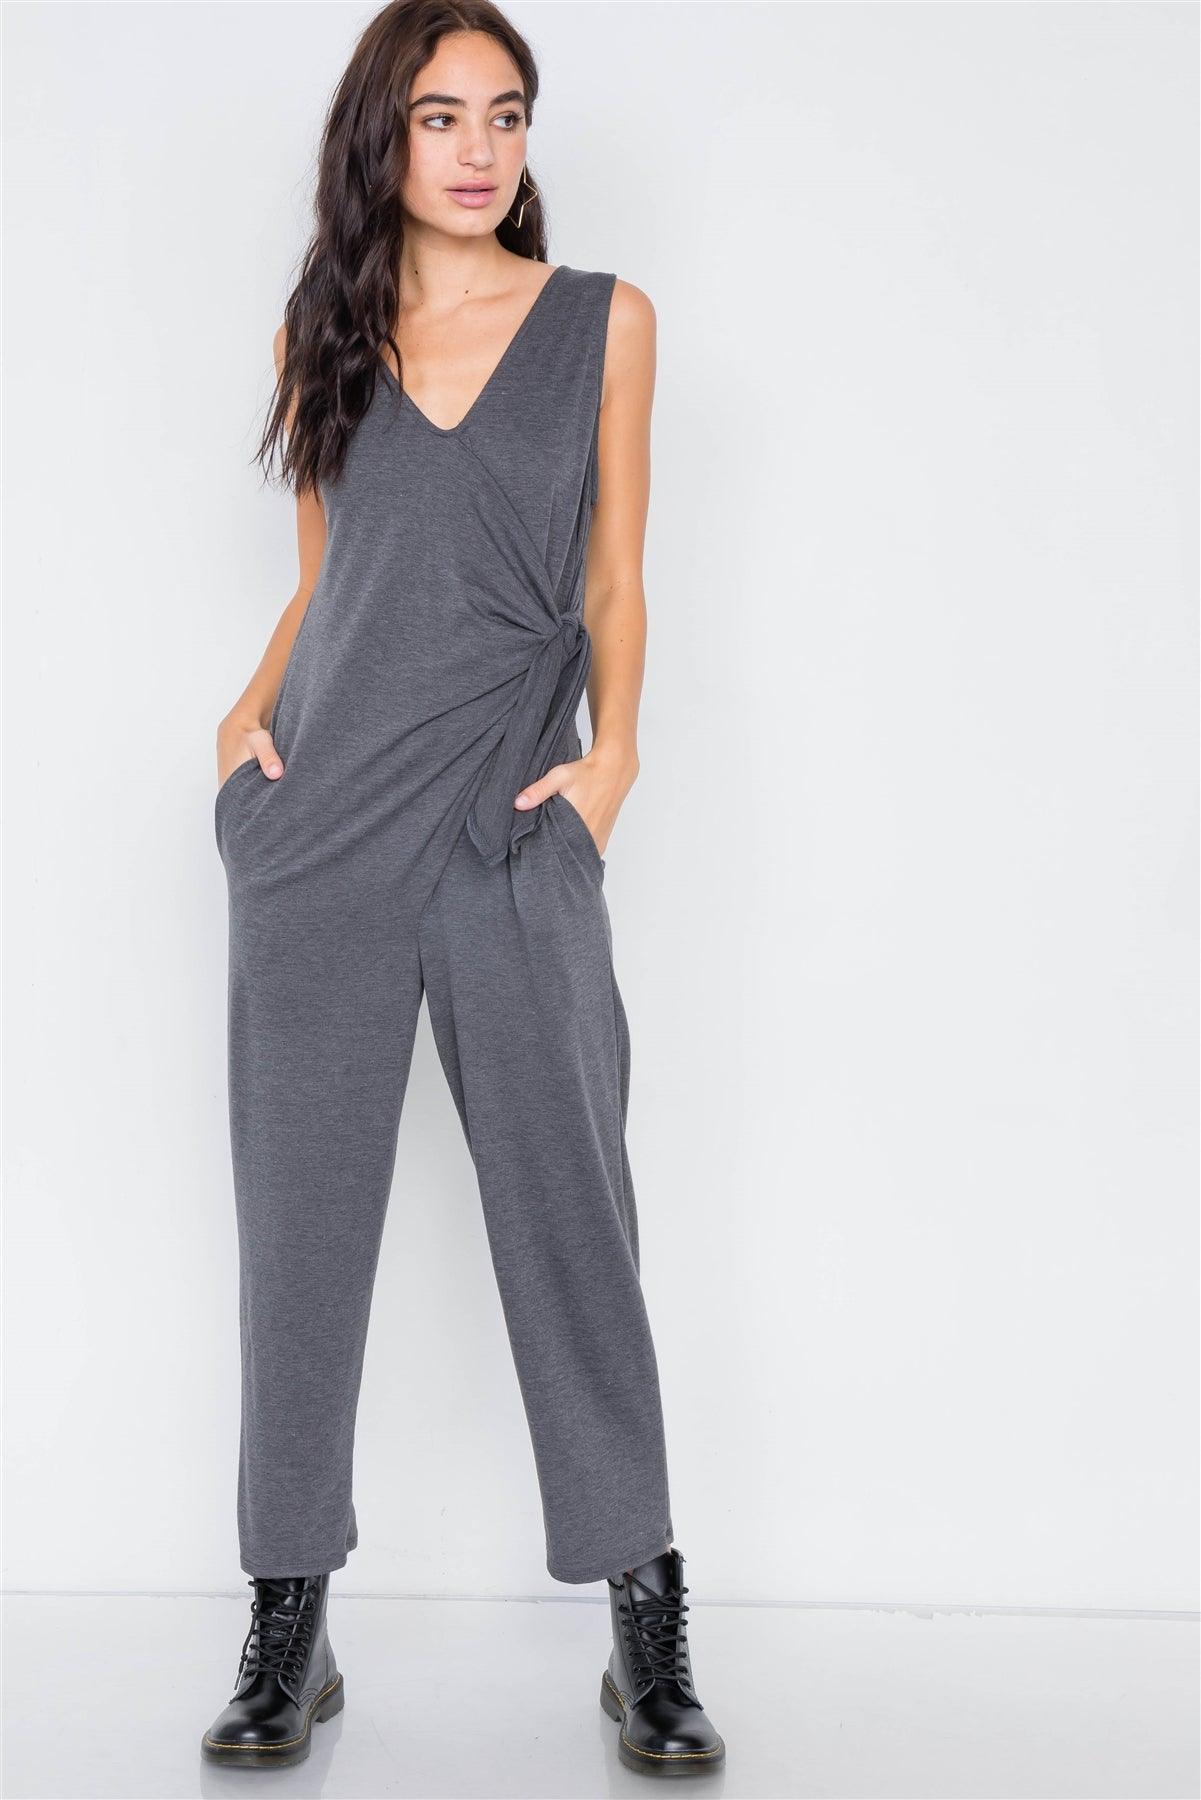 Charcoal Marled Knit Mock Wrap Ankle Length Jumpsuit